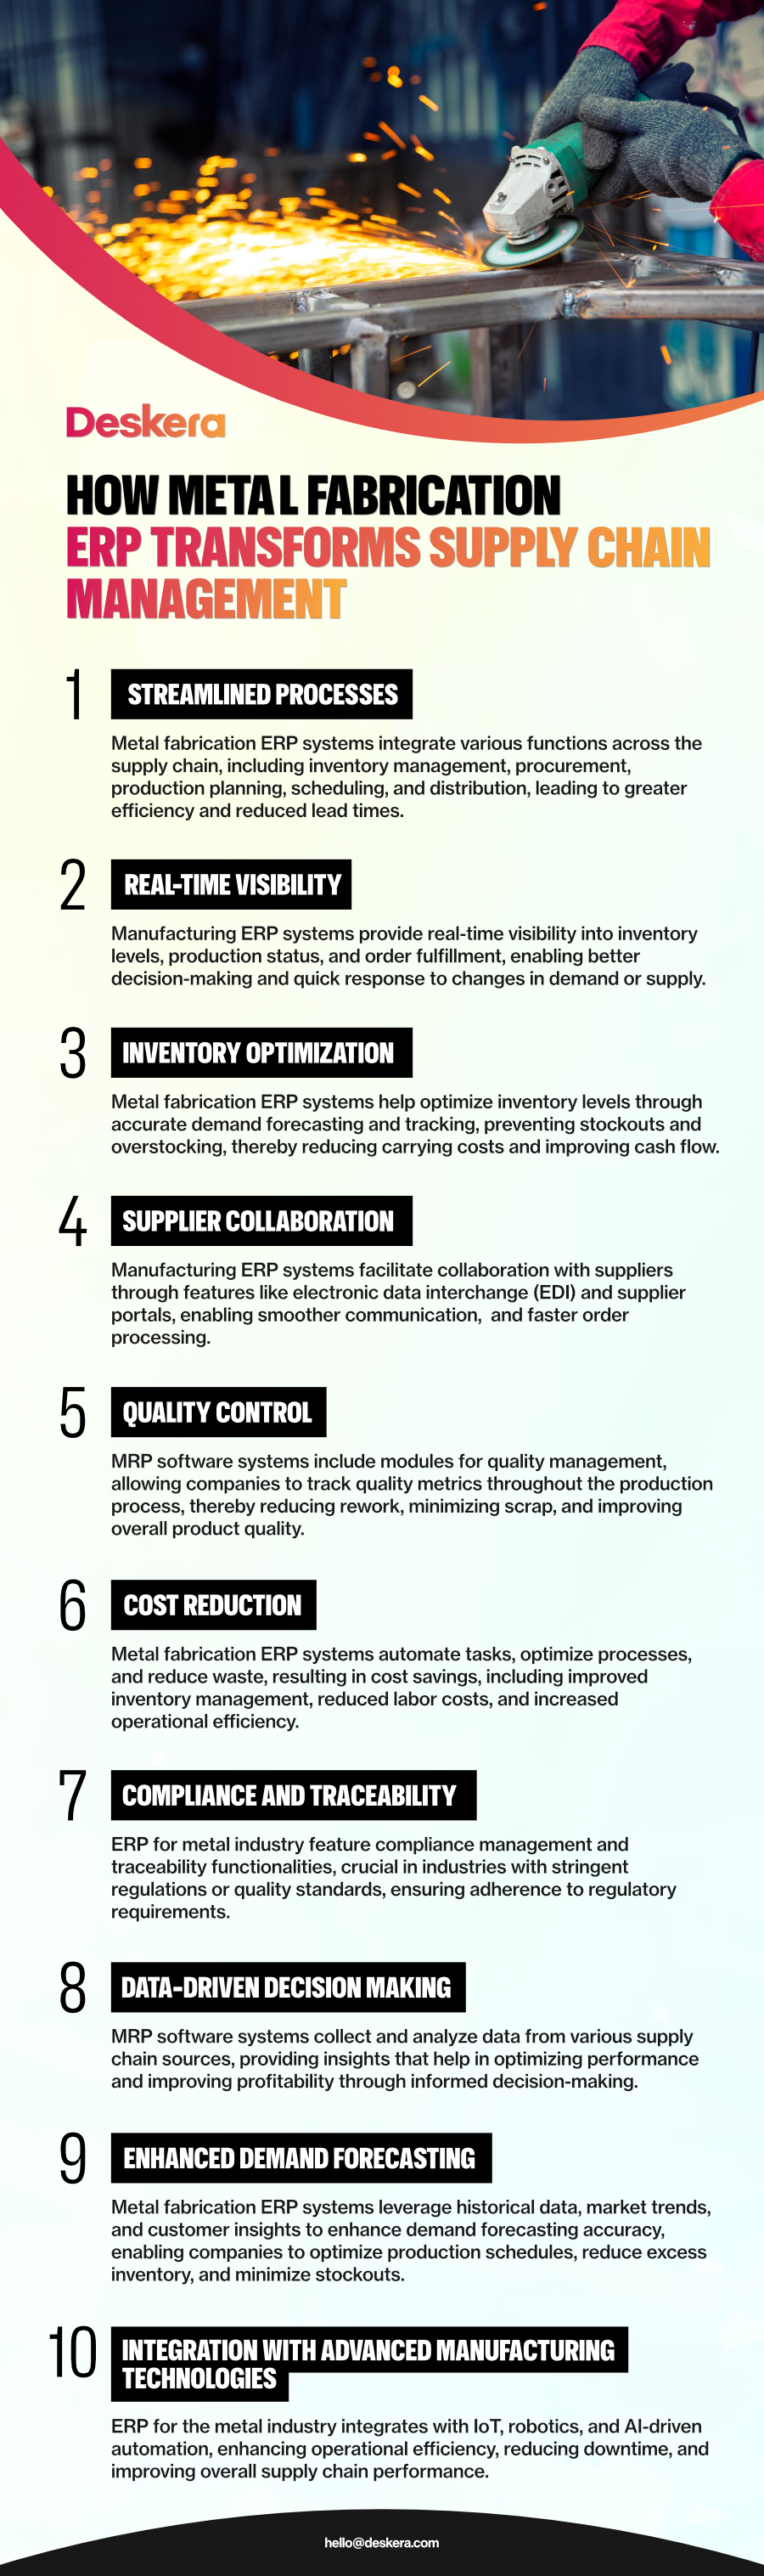 Metal fabrication ERP helps in transforming supply chain management through streamlined processes, data-driven decision-making, supplier collaboration, inventory optimization, and more.